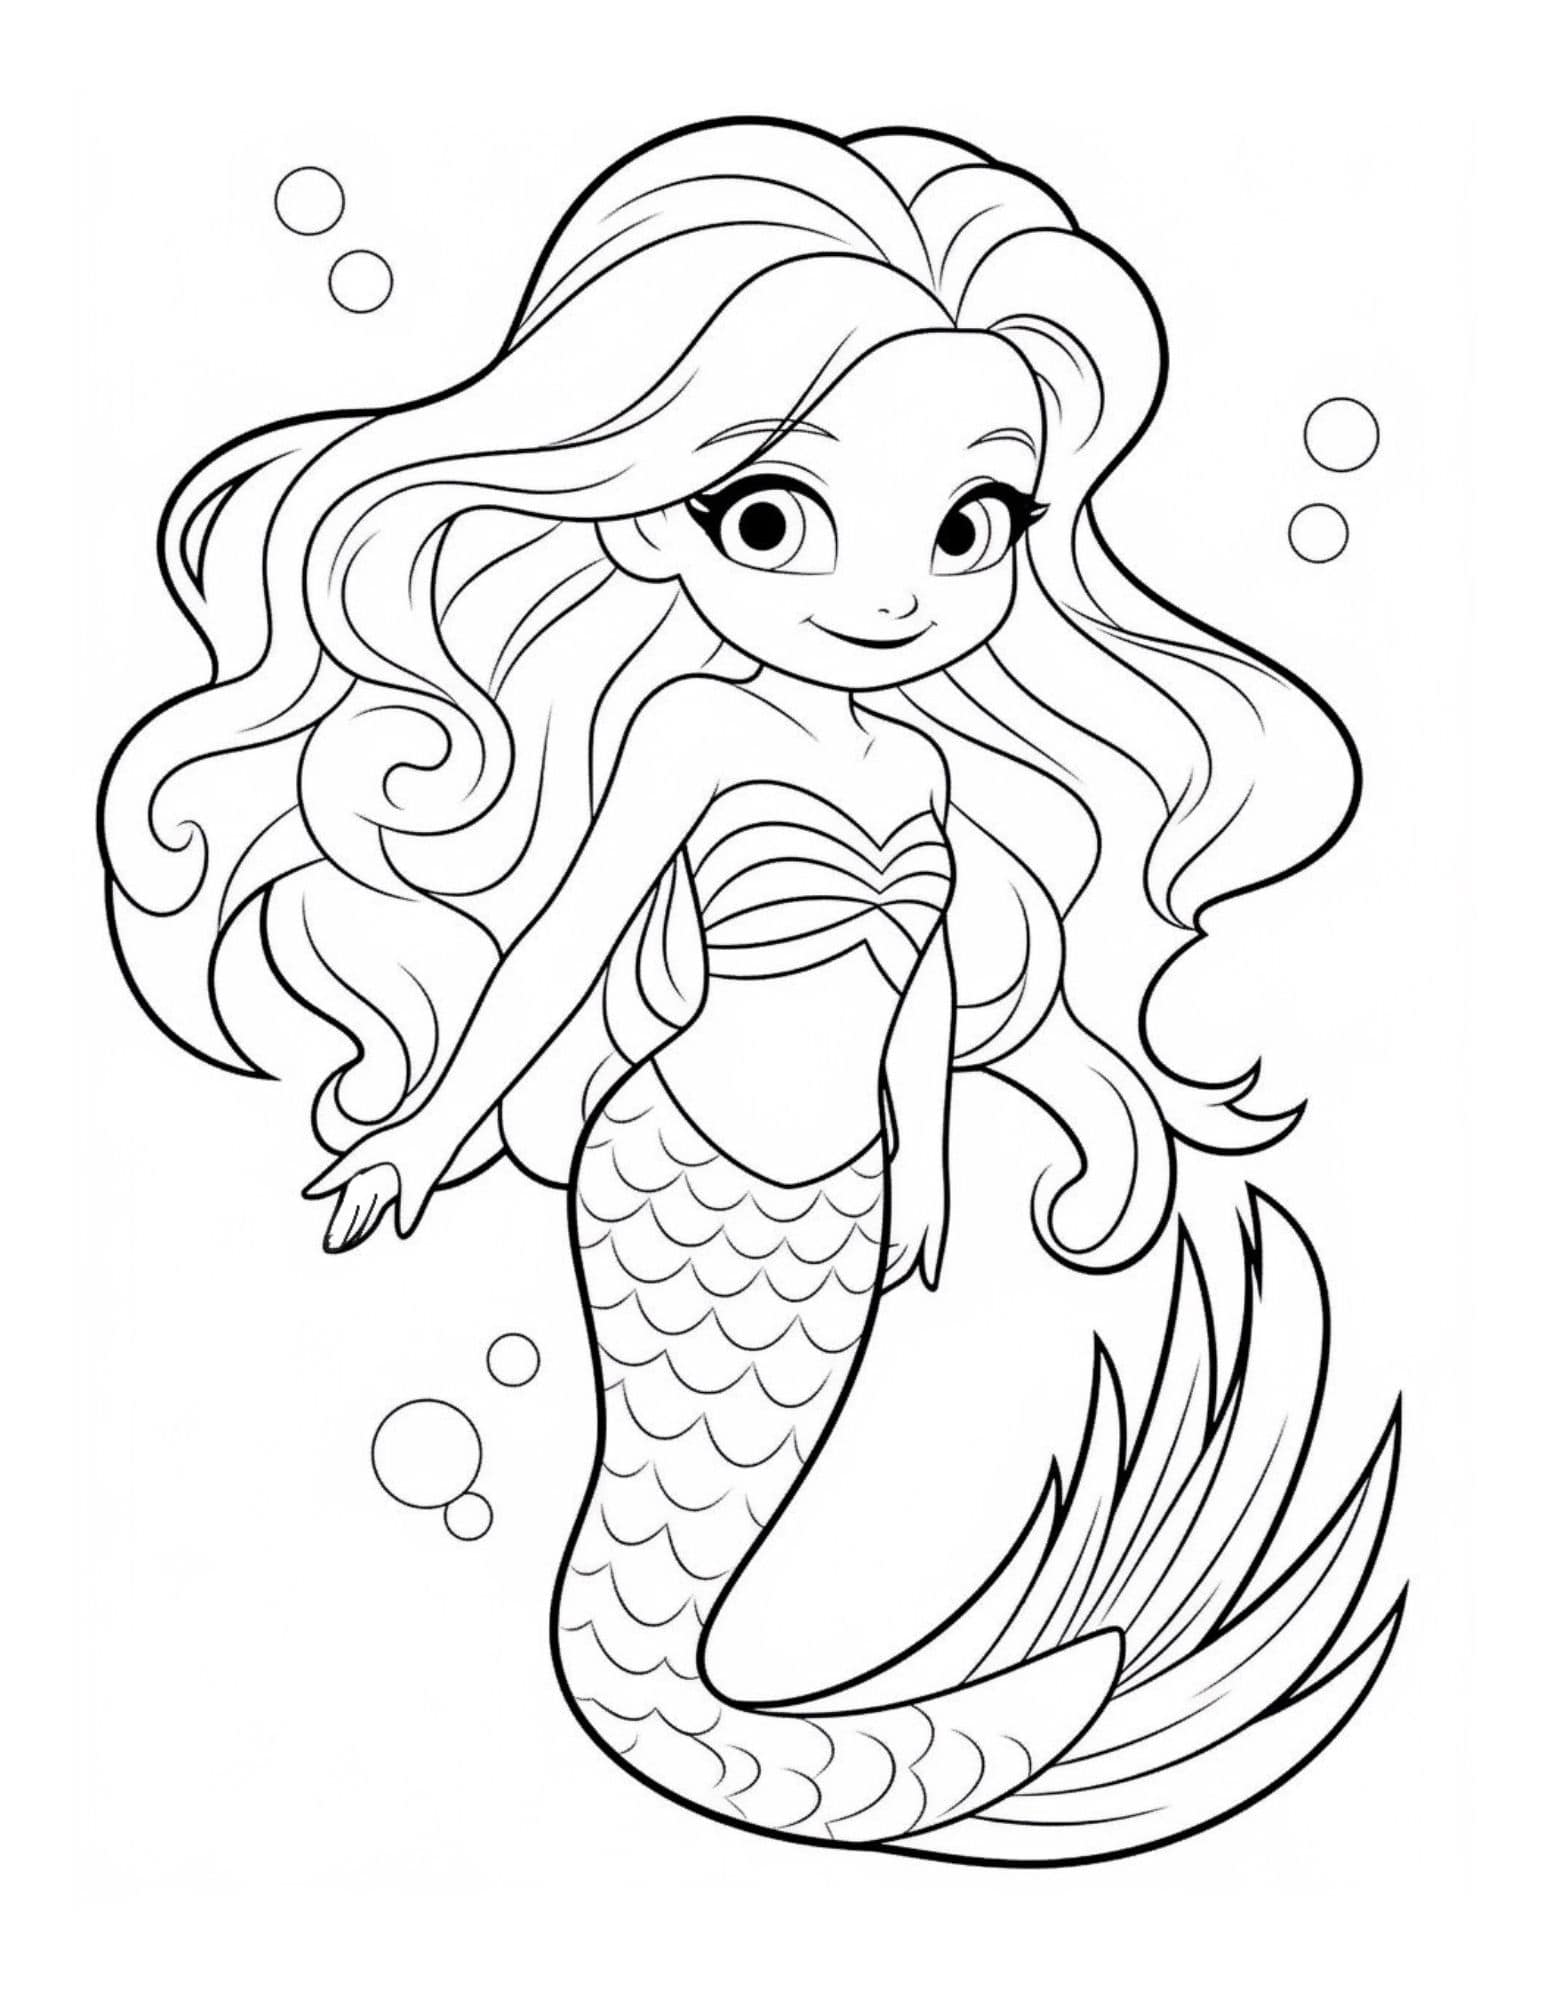 https://www.ourmindfullife.com/wp-content/uploads/2023/07/Simple-and-cute-barbie-mermaid-coloring-page-for-kids-original.jpg